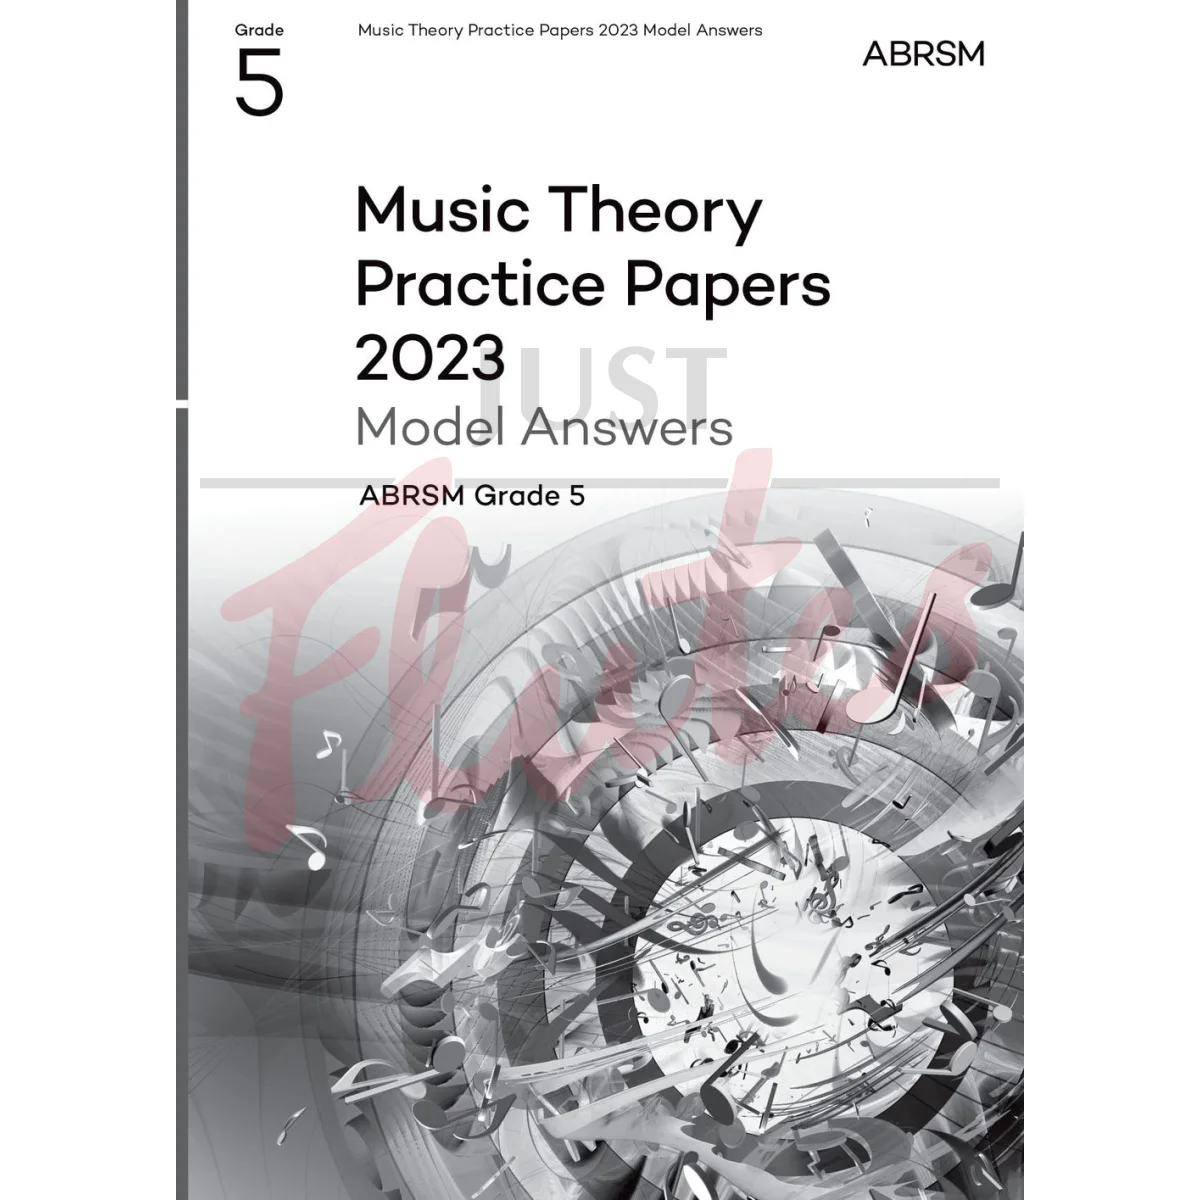 Music Theory Practice Papers 2023 Grade 5 - Model Answers